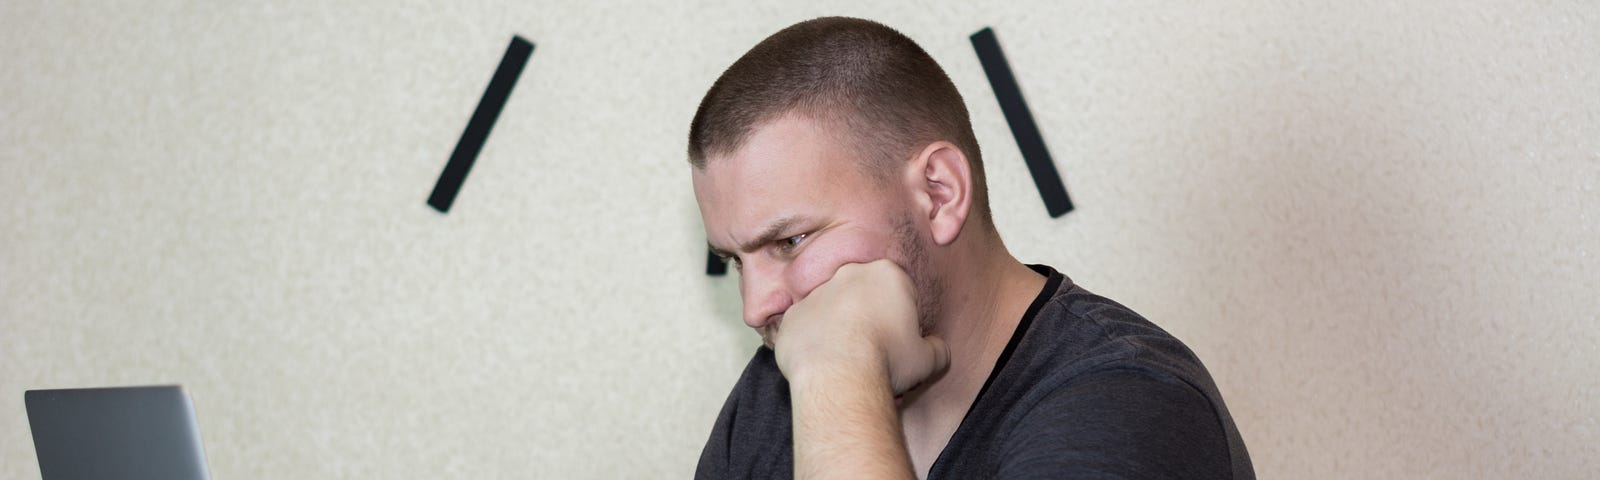 Man looking at his laptop with a frustrated expression.